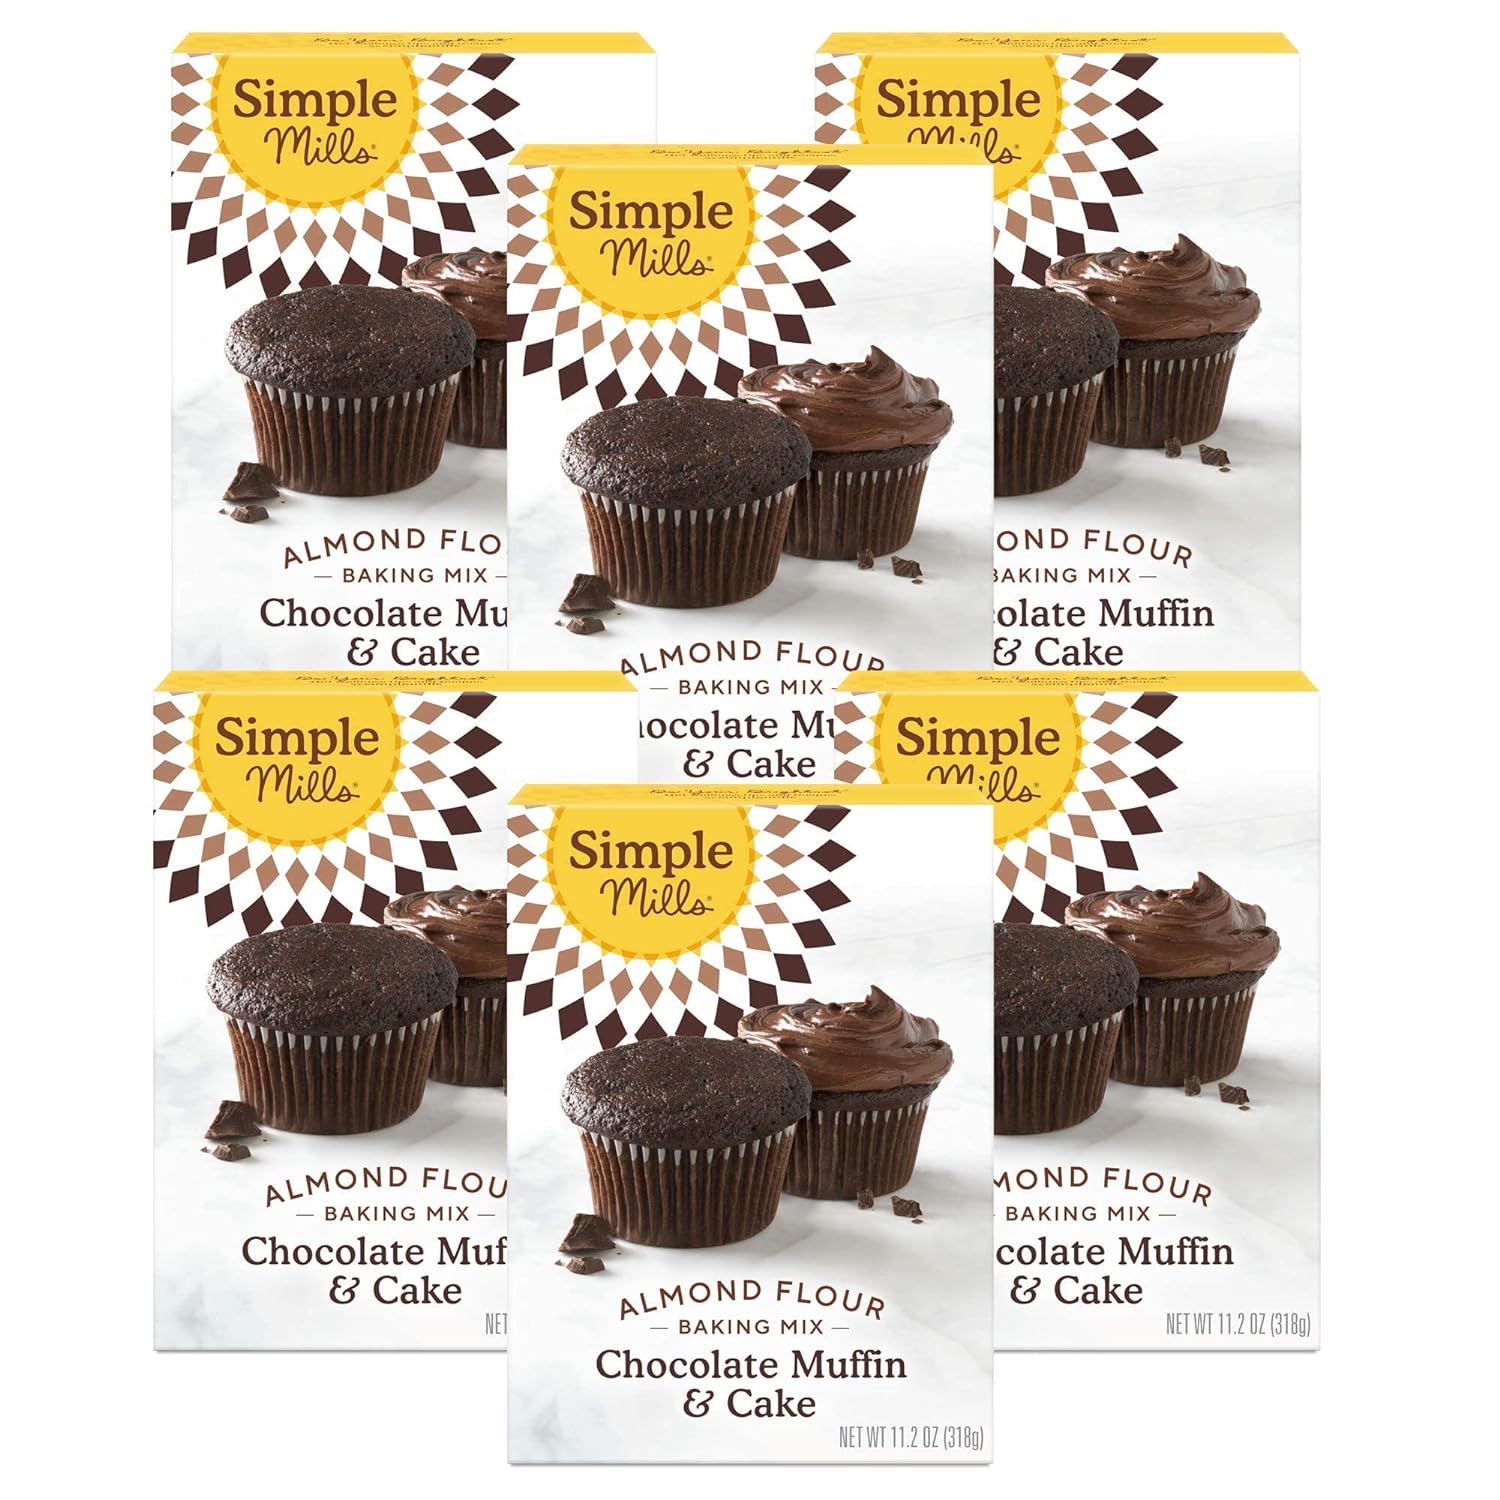 Simple Mills Almond Flour Baking Mix, Chocolate Muffin & Cake Mix - Gluten Free, Plant Based, Paleo Friendly, 11.2 Ounce (Pack of 6)